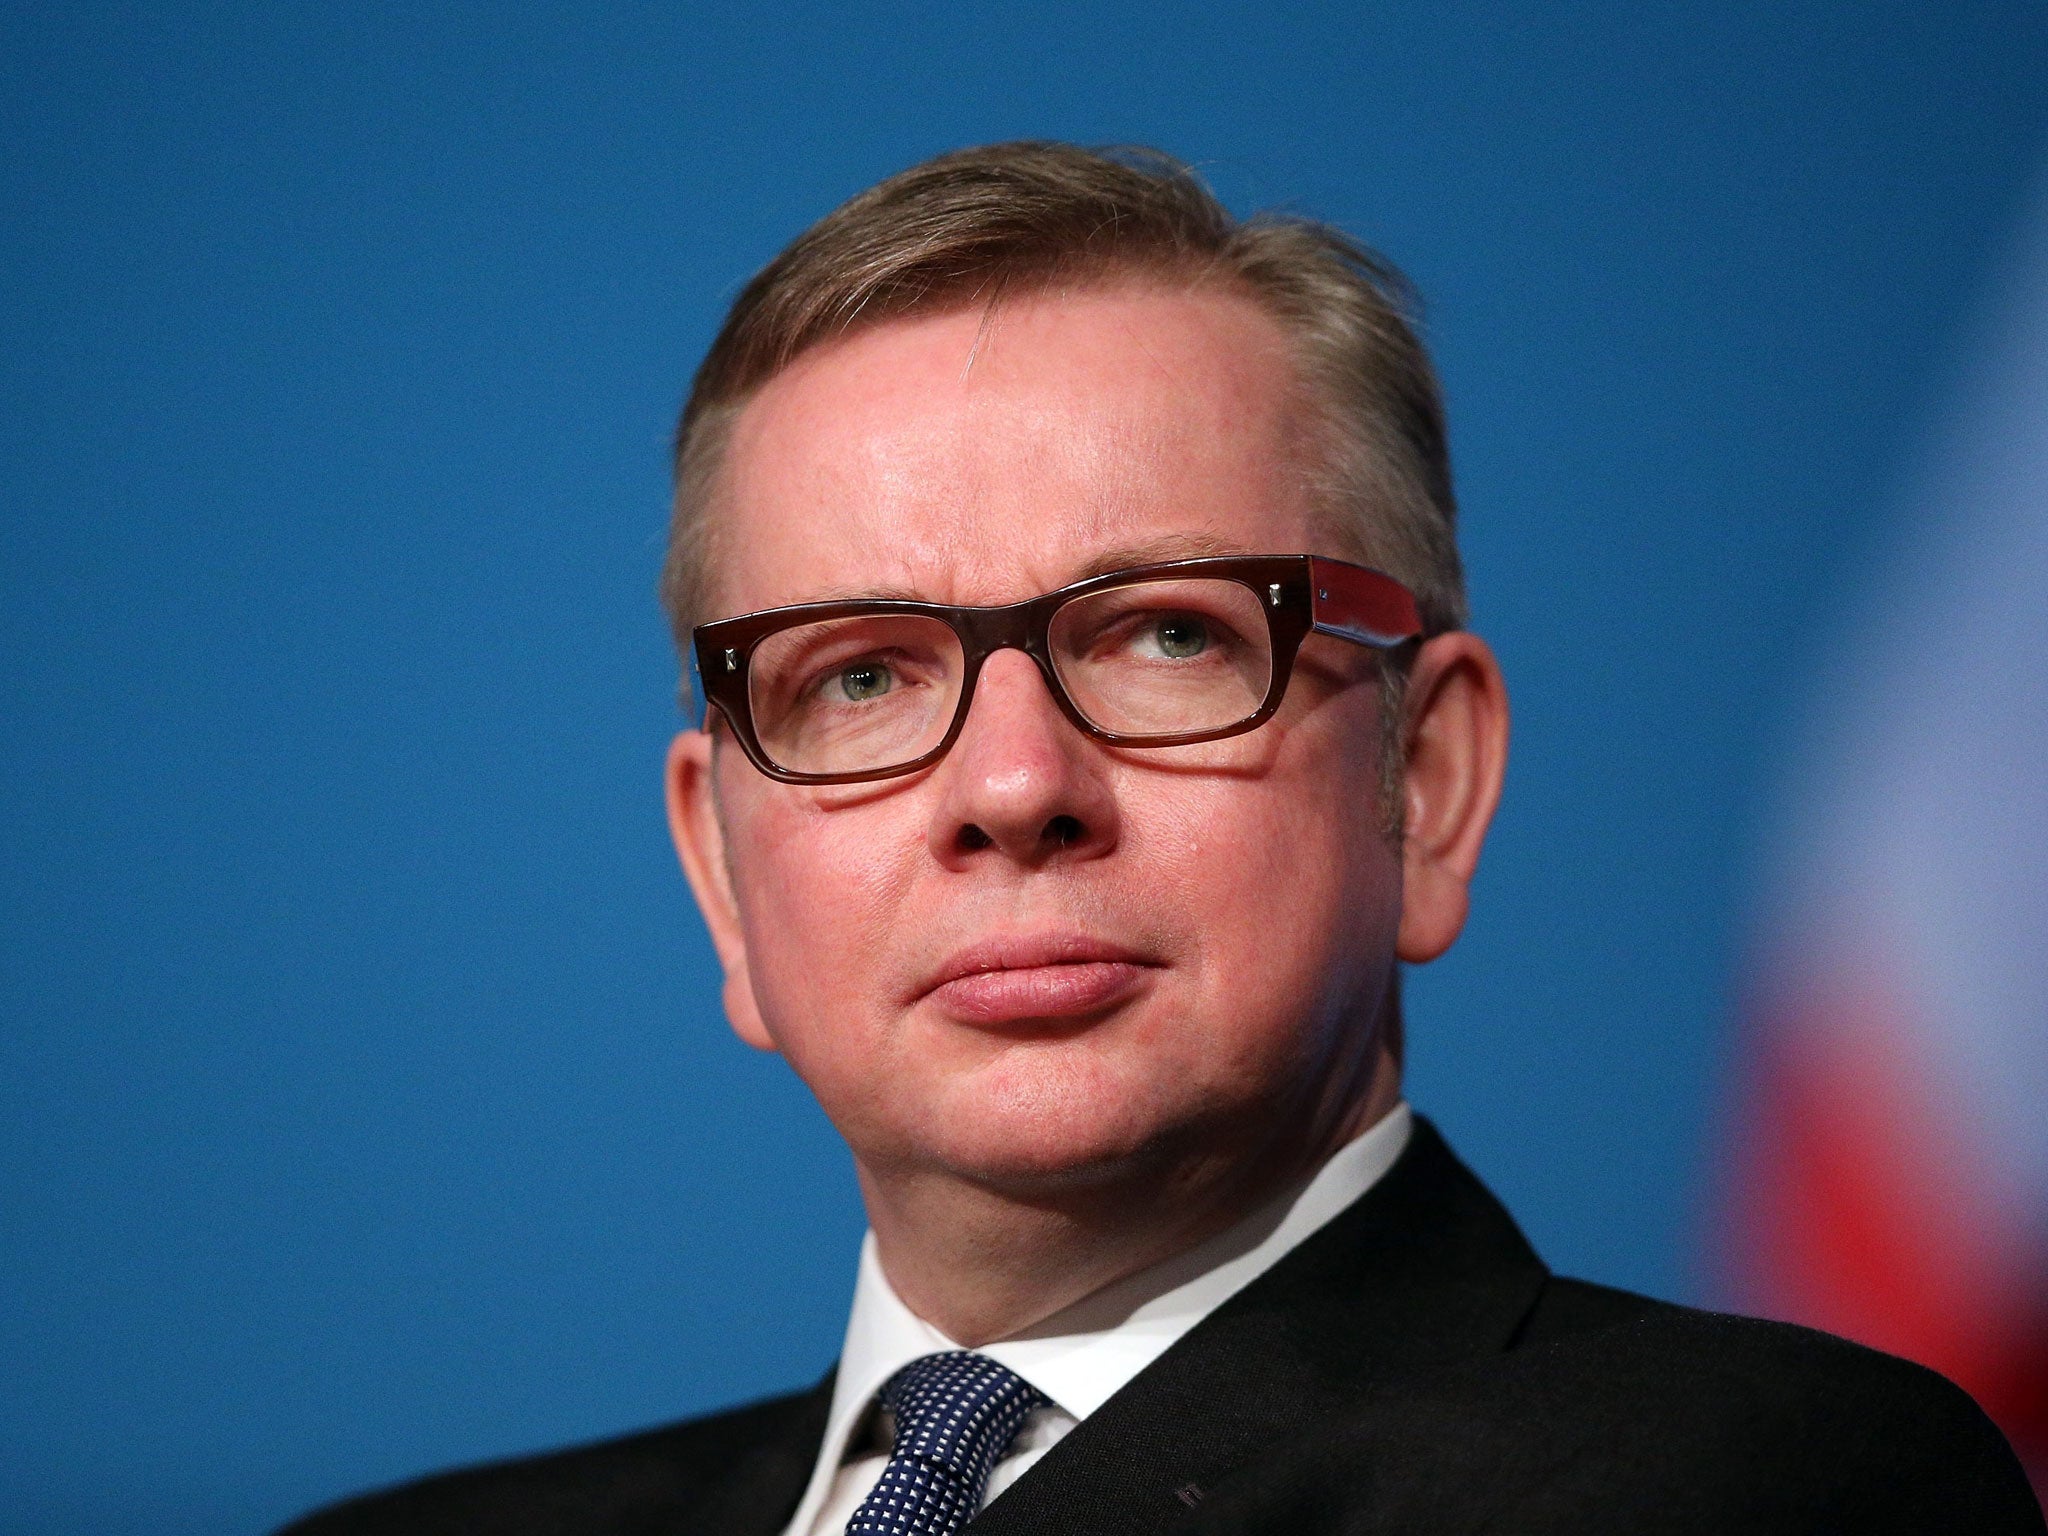 One of the country's leading headteachers is to accuse Education Secretary Michael Gove of “chickening out” of bringing back a return to grammar schools